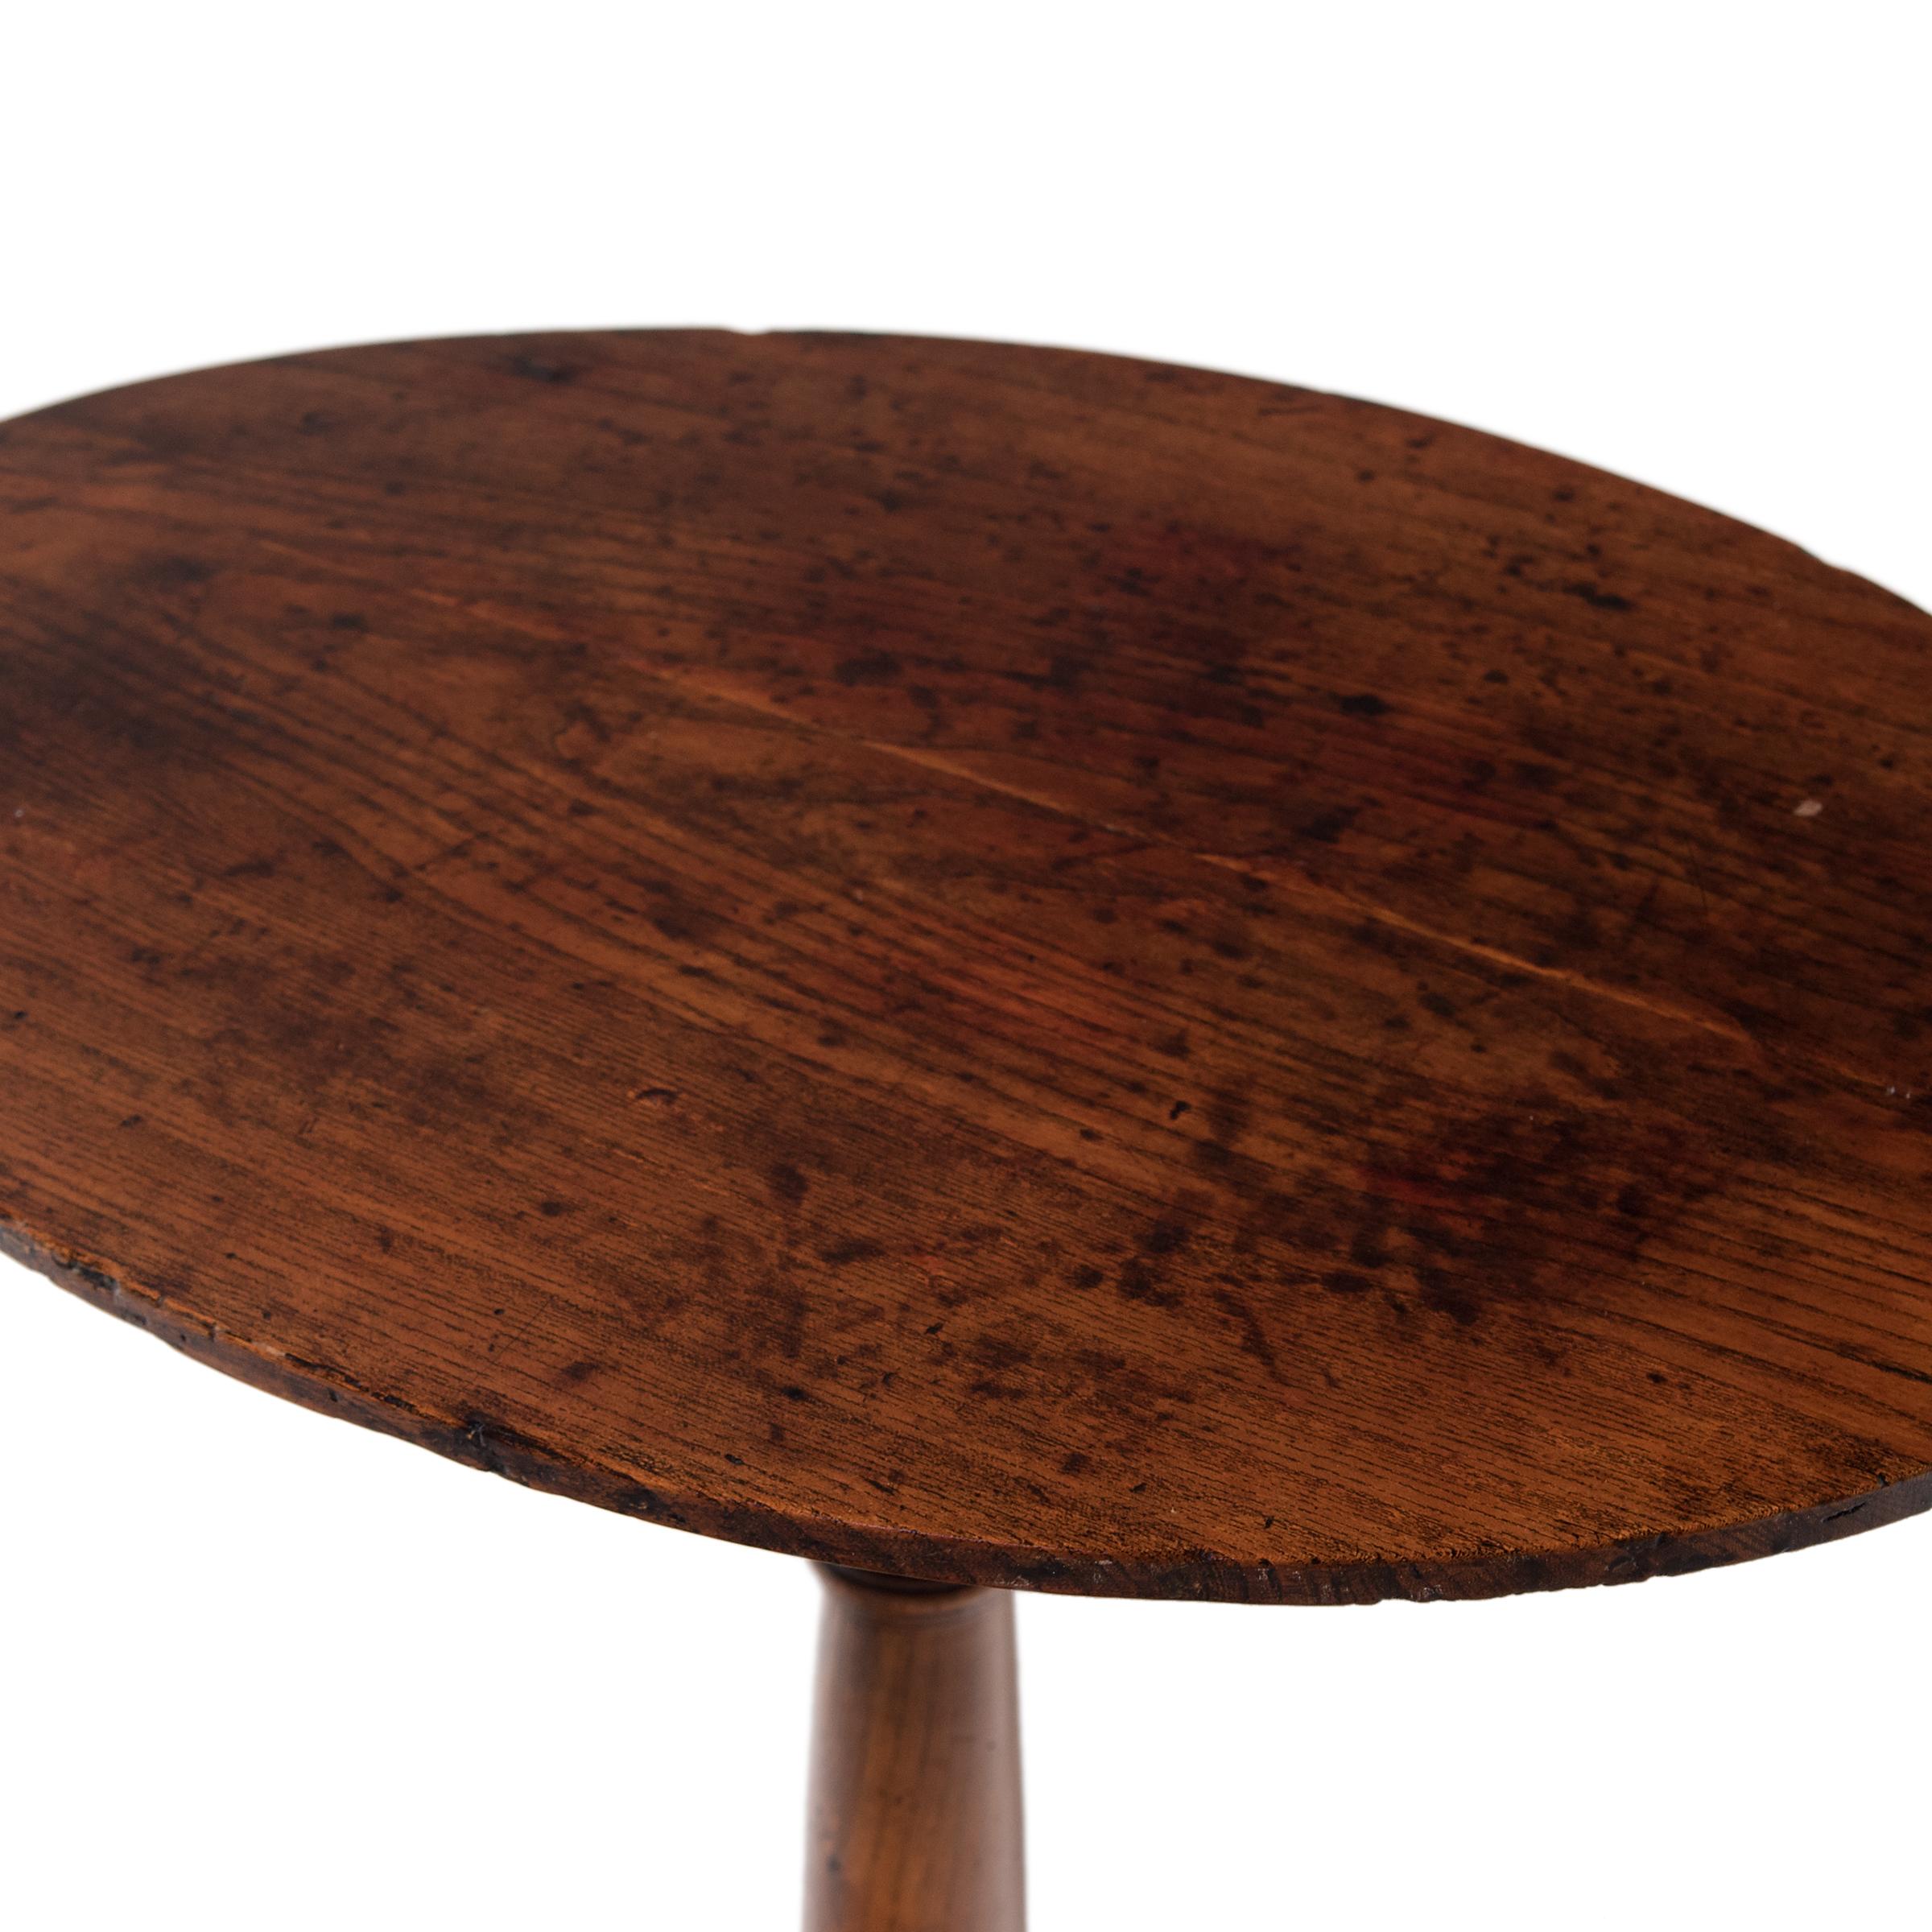 Turned English Oval Top Pedestal Table, c. 1850